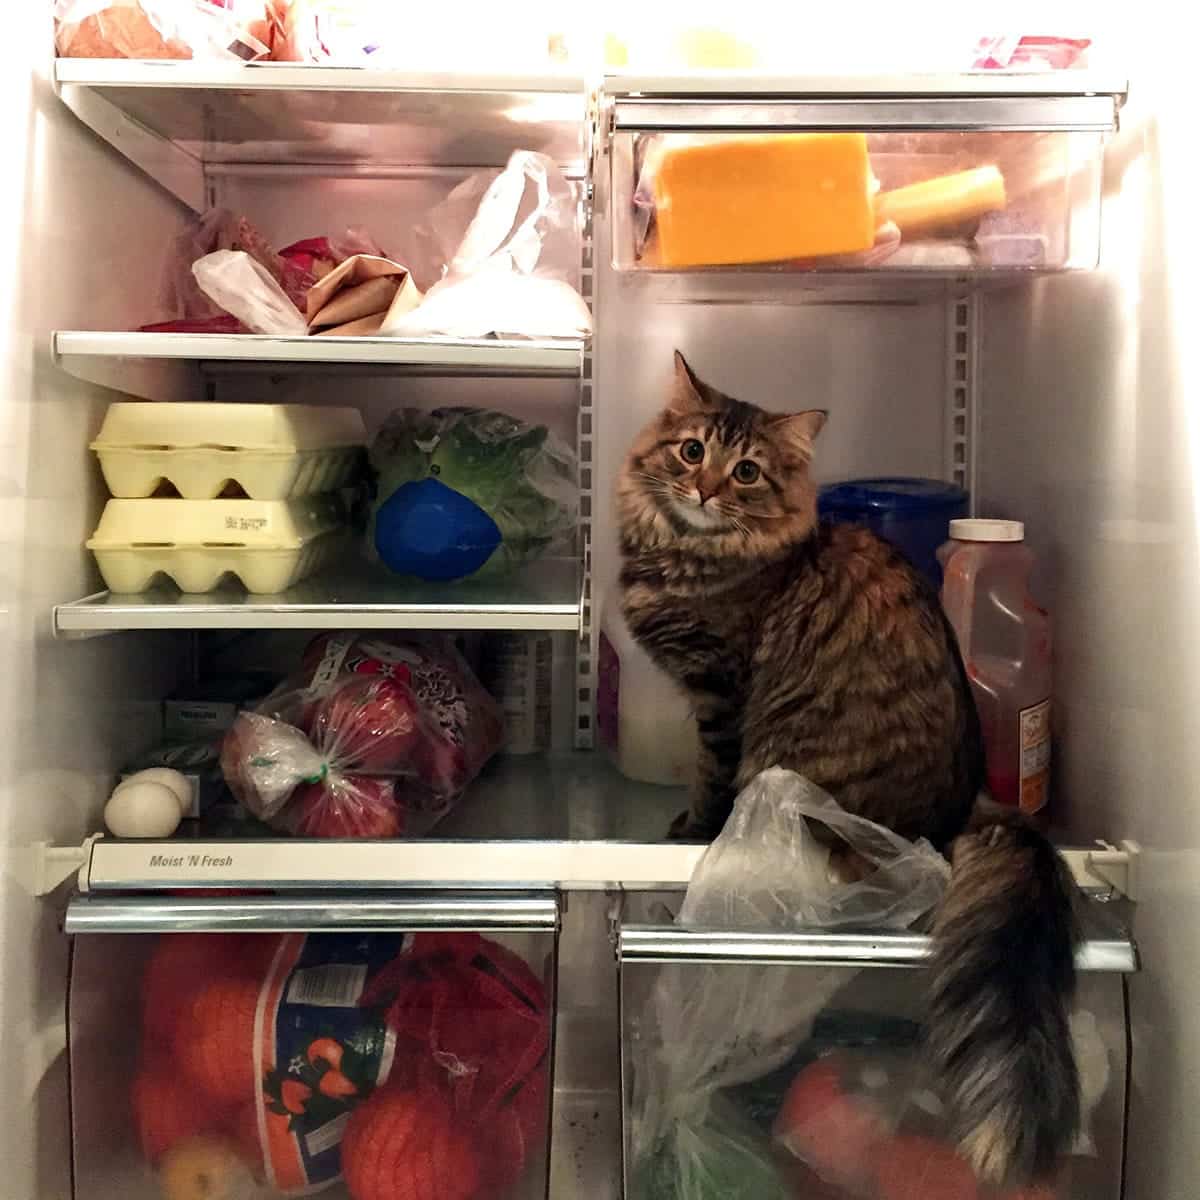 A photo of a cat sitting on a shelf in a refrigerator.